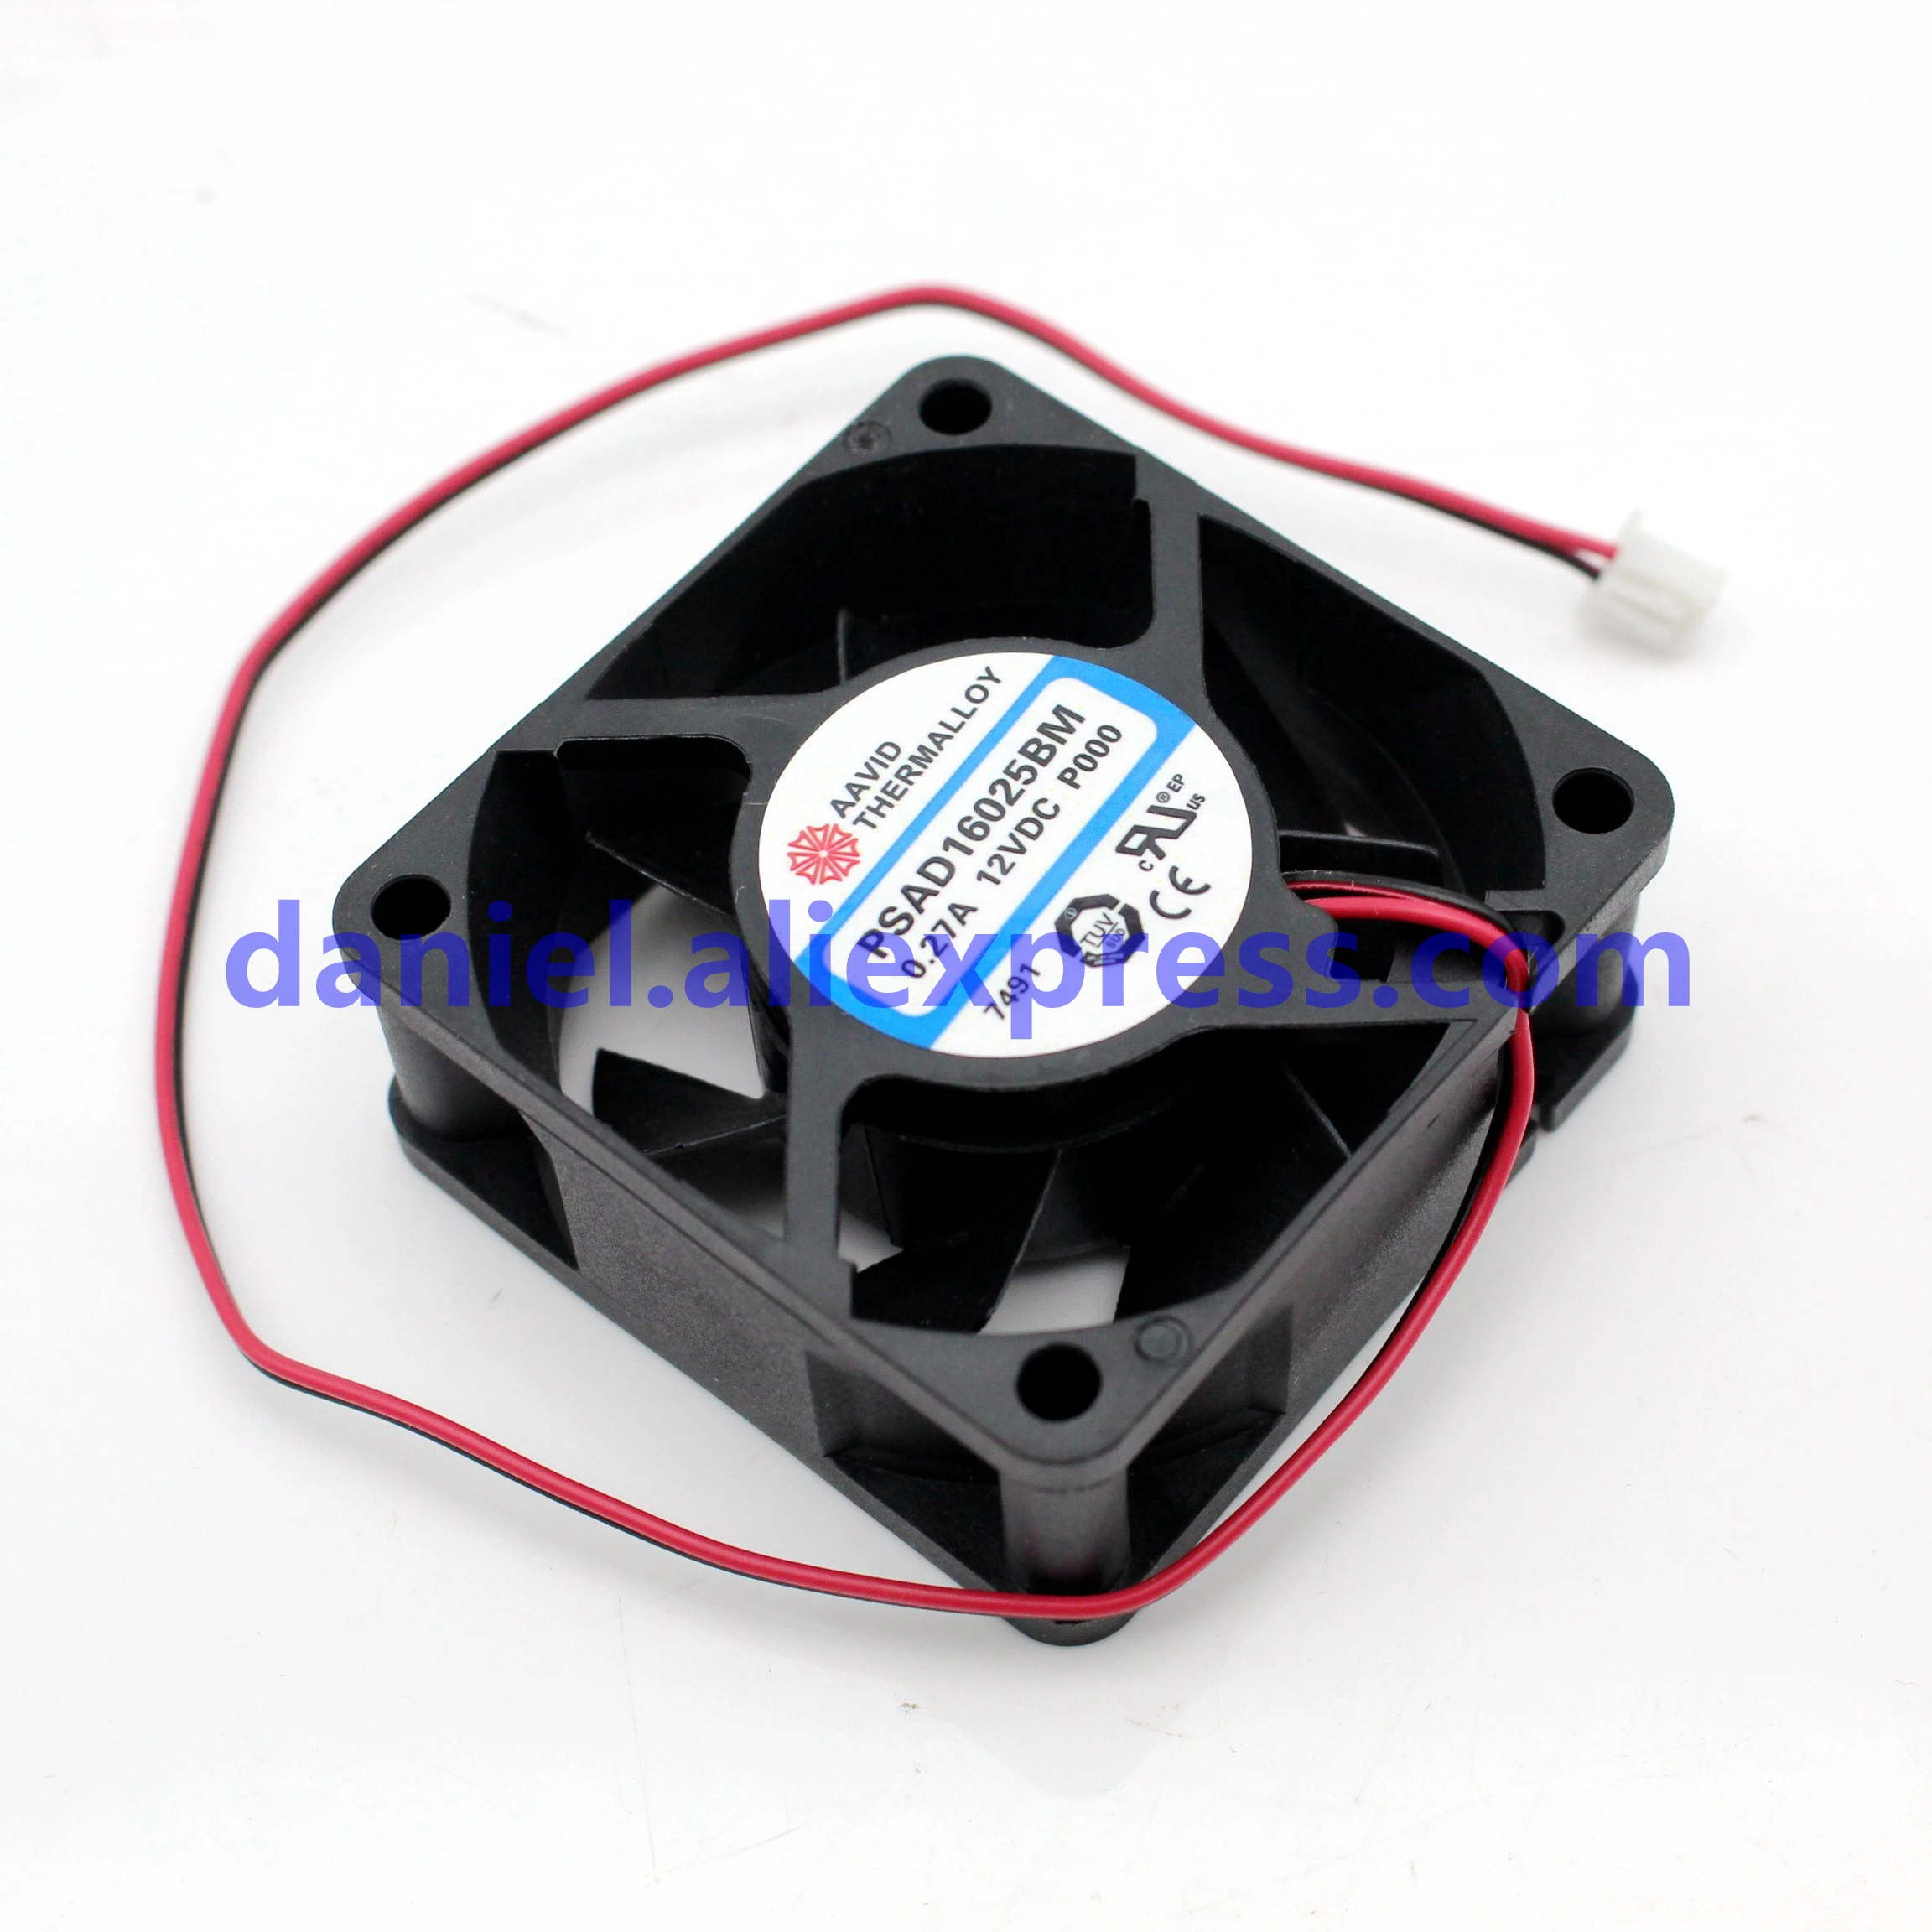 25mm 2pin Ant S9 Fan For AAVID THERMALLOY 6025 PSAD16025BM DC12V 0.27A 60 60 